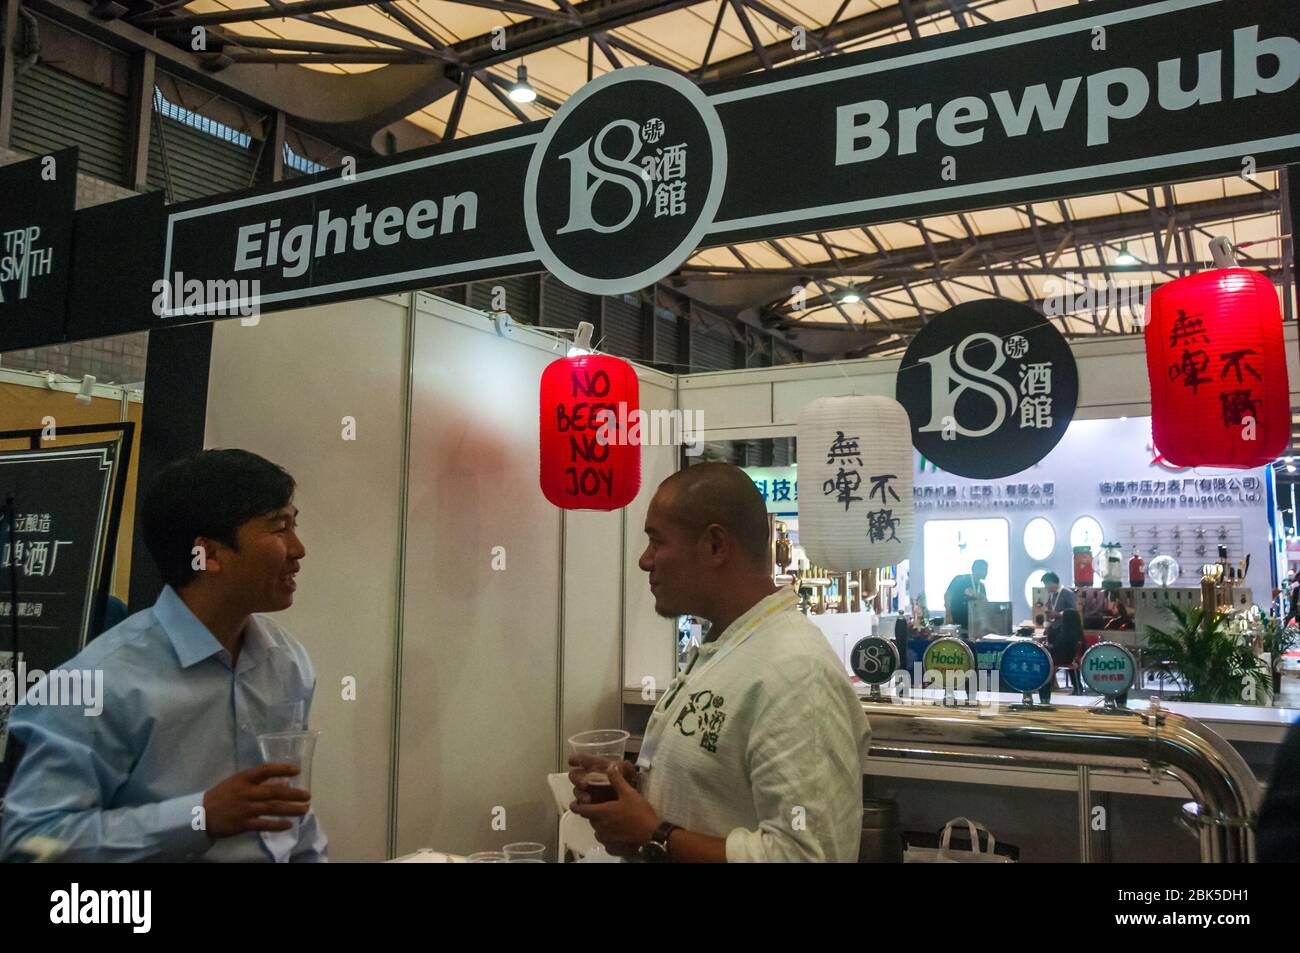 Wuhan's 18 Brewpub's stall at 2016 China Craft Beer Summit in Shanghai. Brewmaster Jiang Qi (right) speaks to customer. Stock Photo